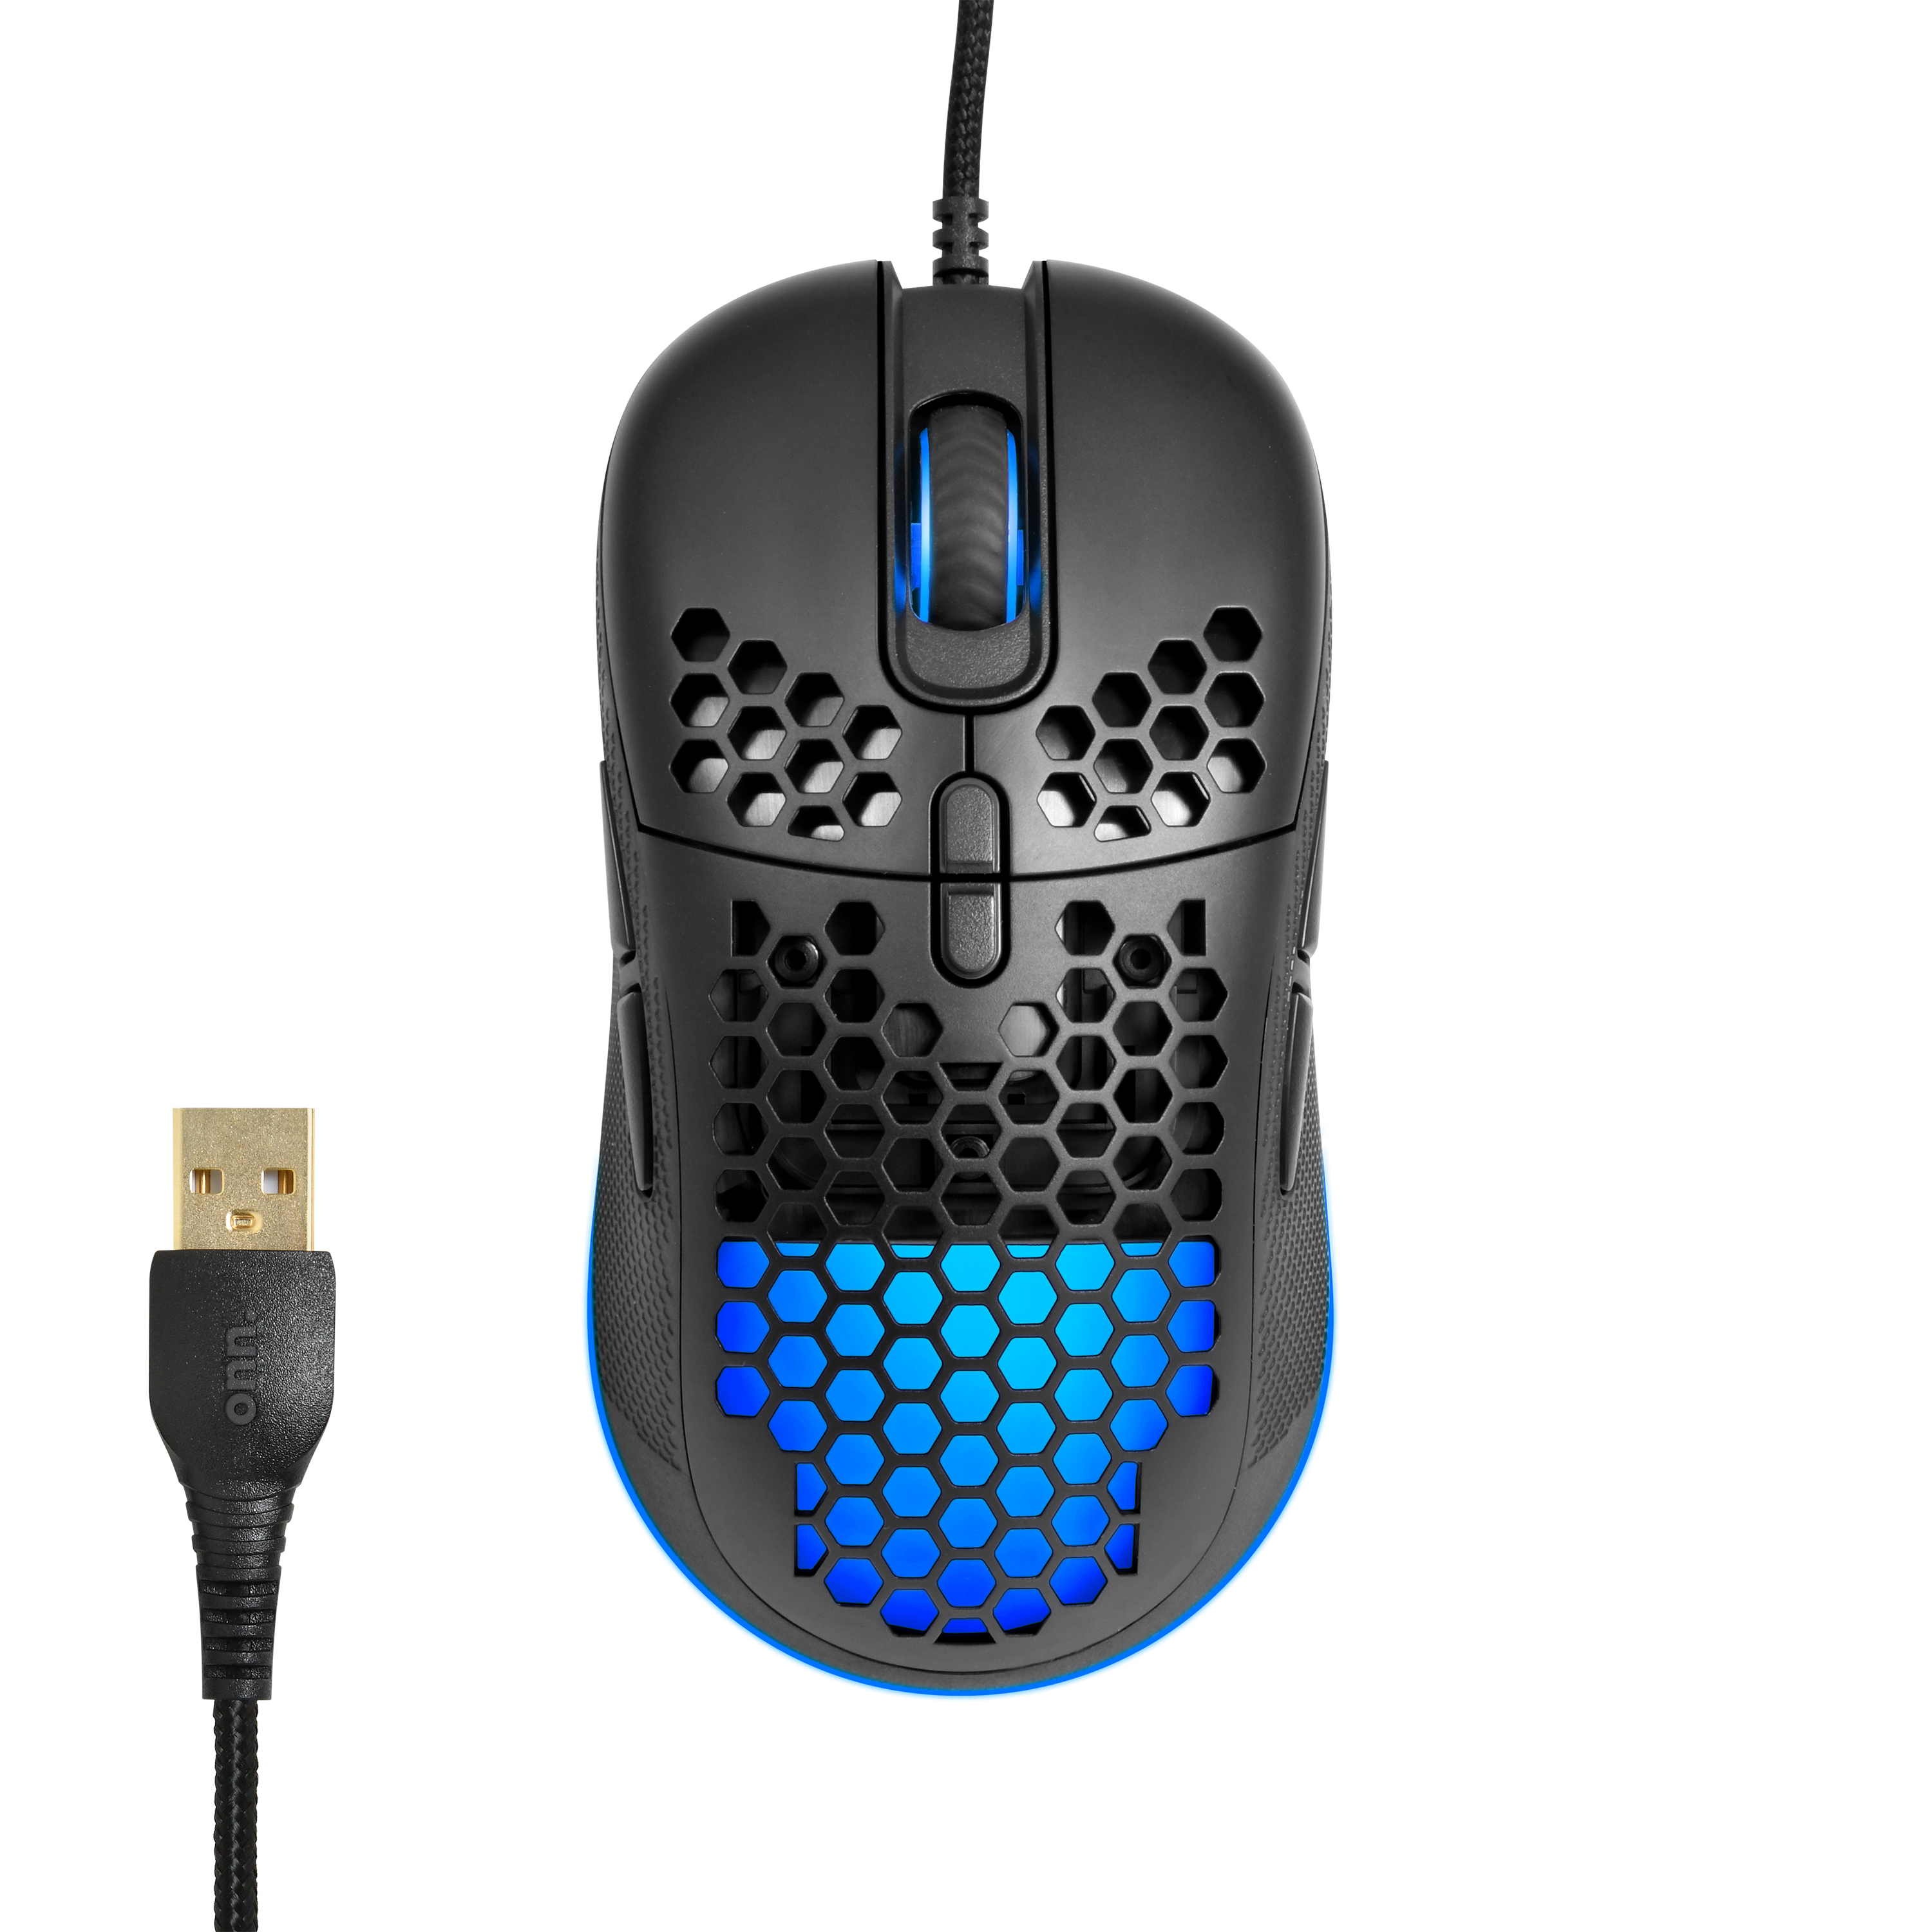 onn. Lightweight Gaming Mouse with LED Lighting and 7 Programmable Buttons, Adjustable 200-7200 DPI - image 1 of 13